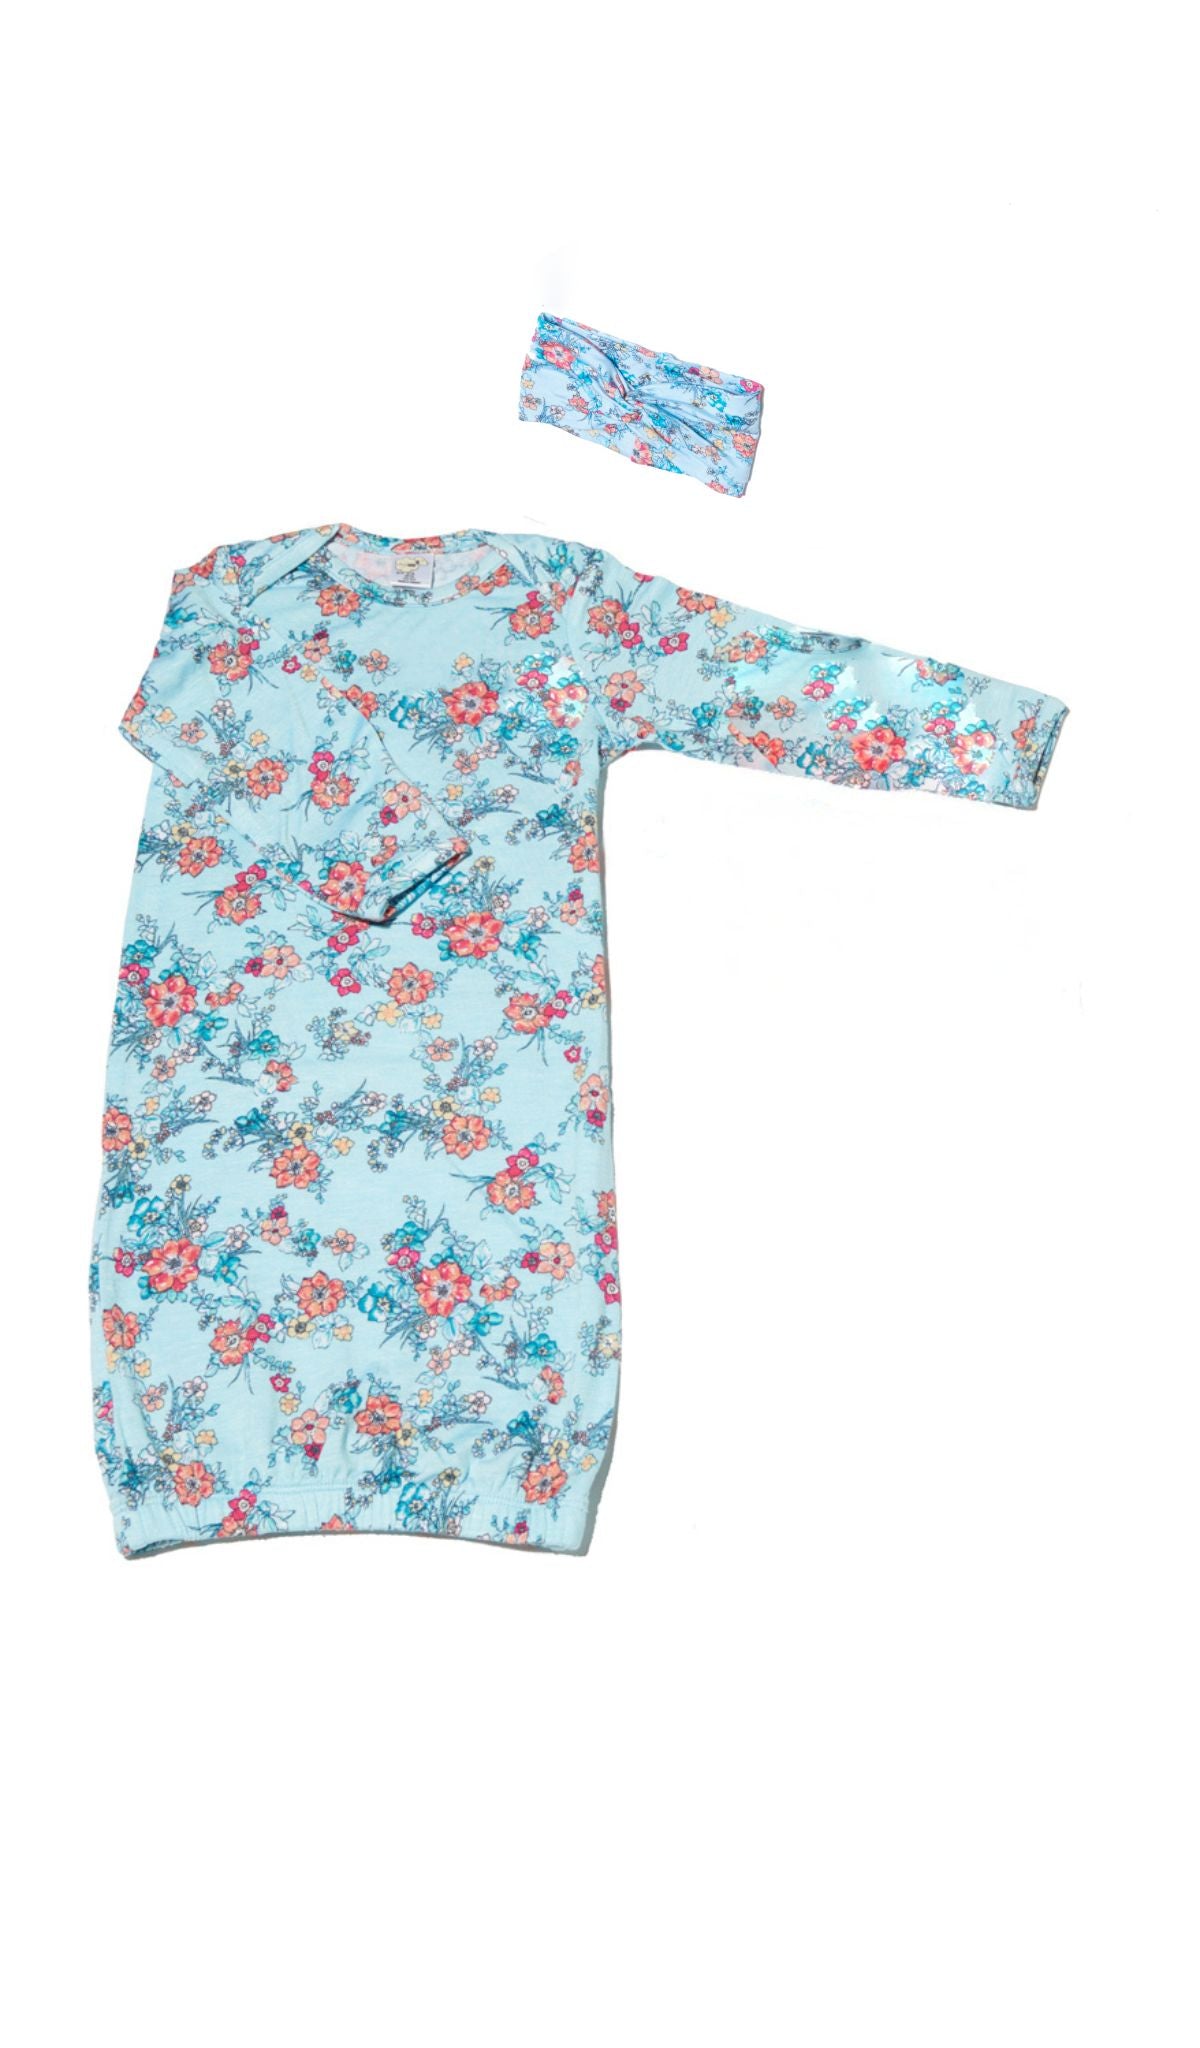 Baby Gown 2-Piece Azure Mist flat shot of baby gown and matching headwrap in floral print.